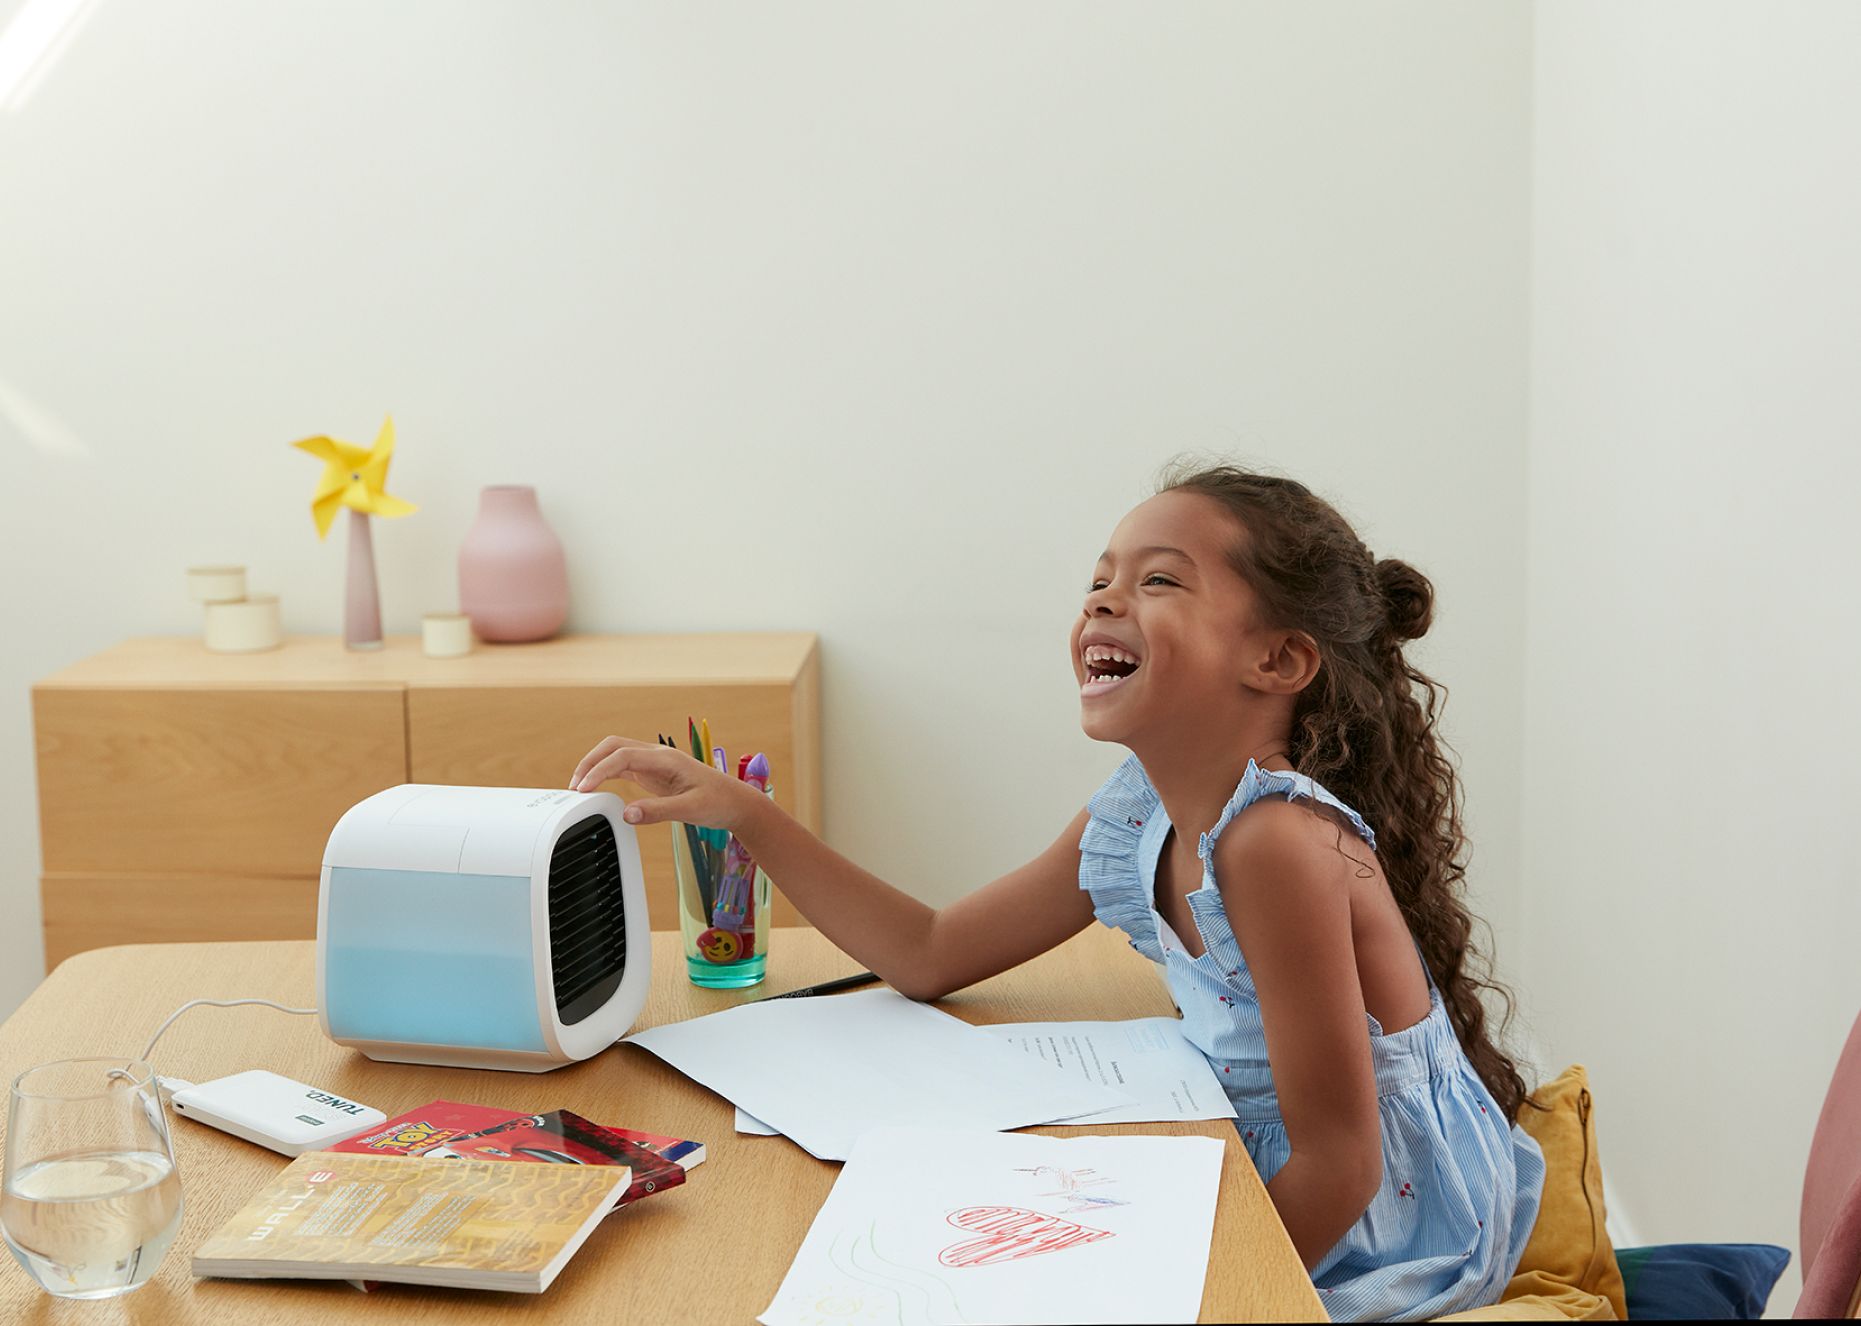 A young girl smiling and touching a portable evapolar air cooler